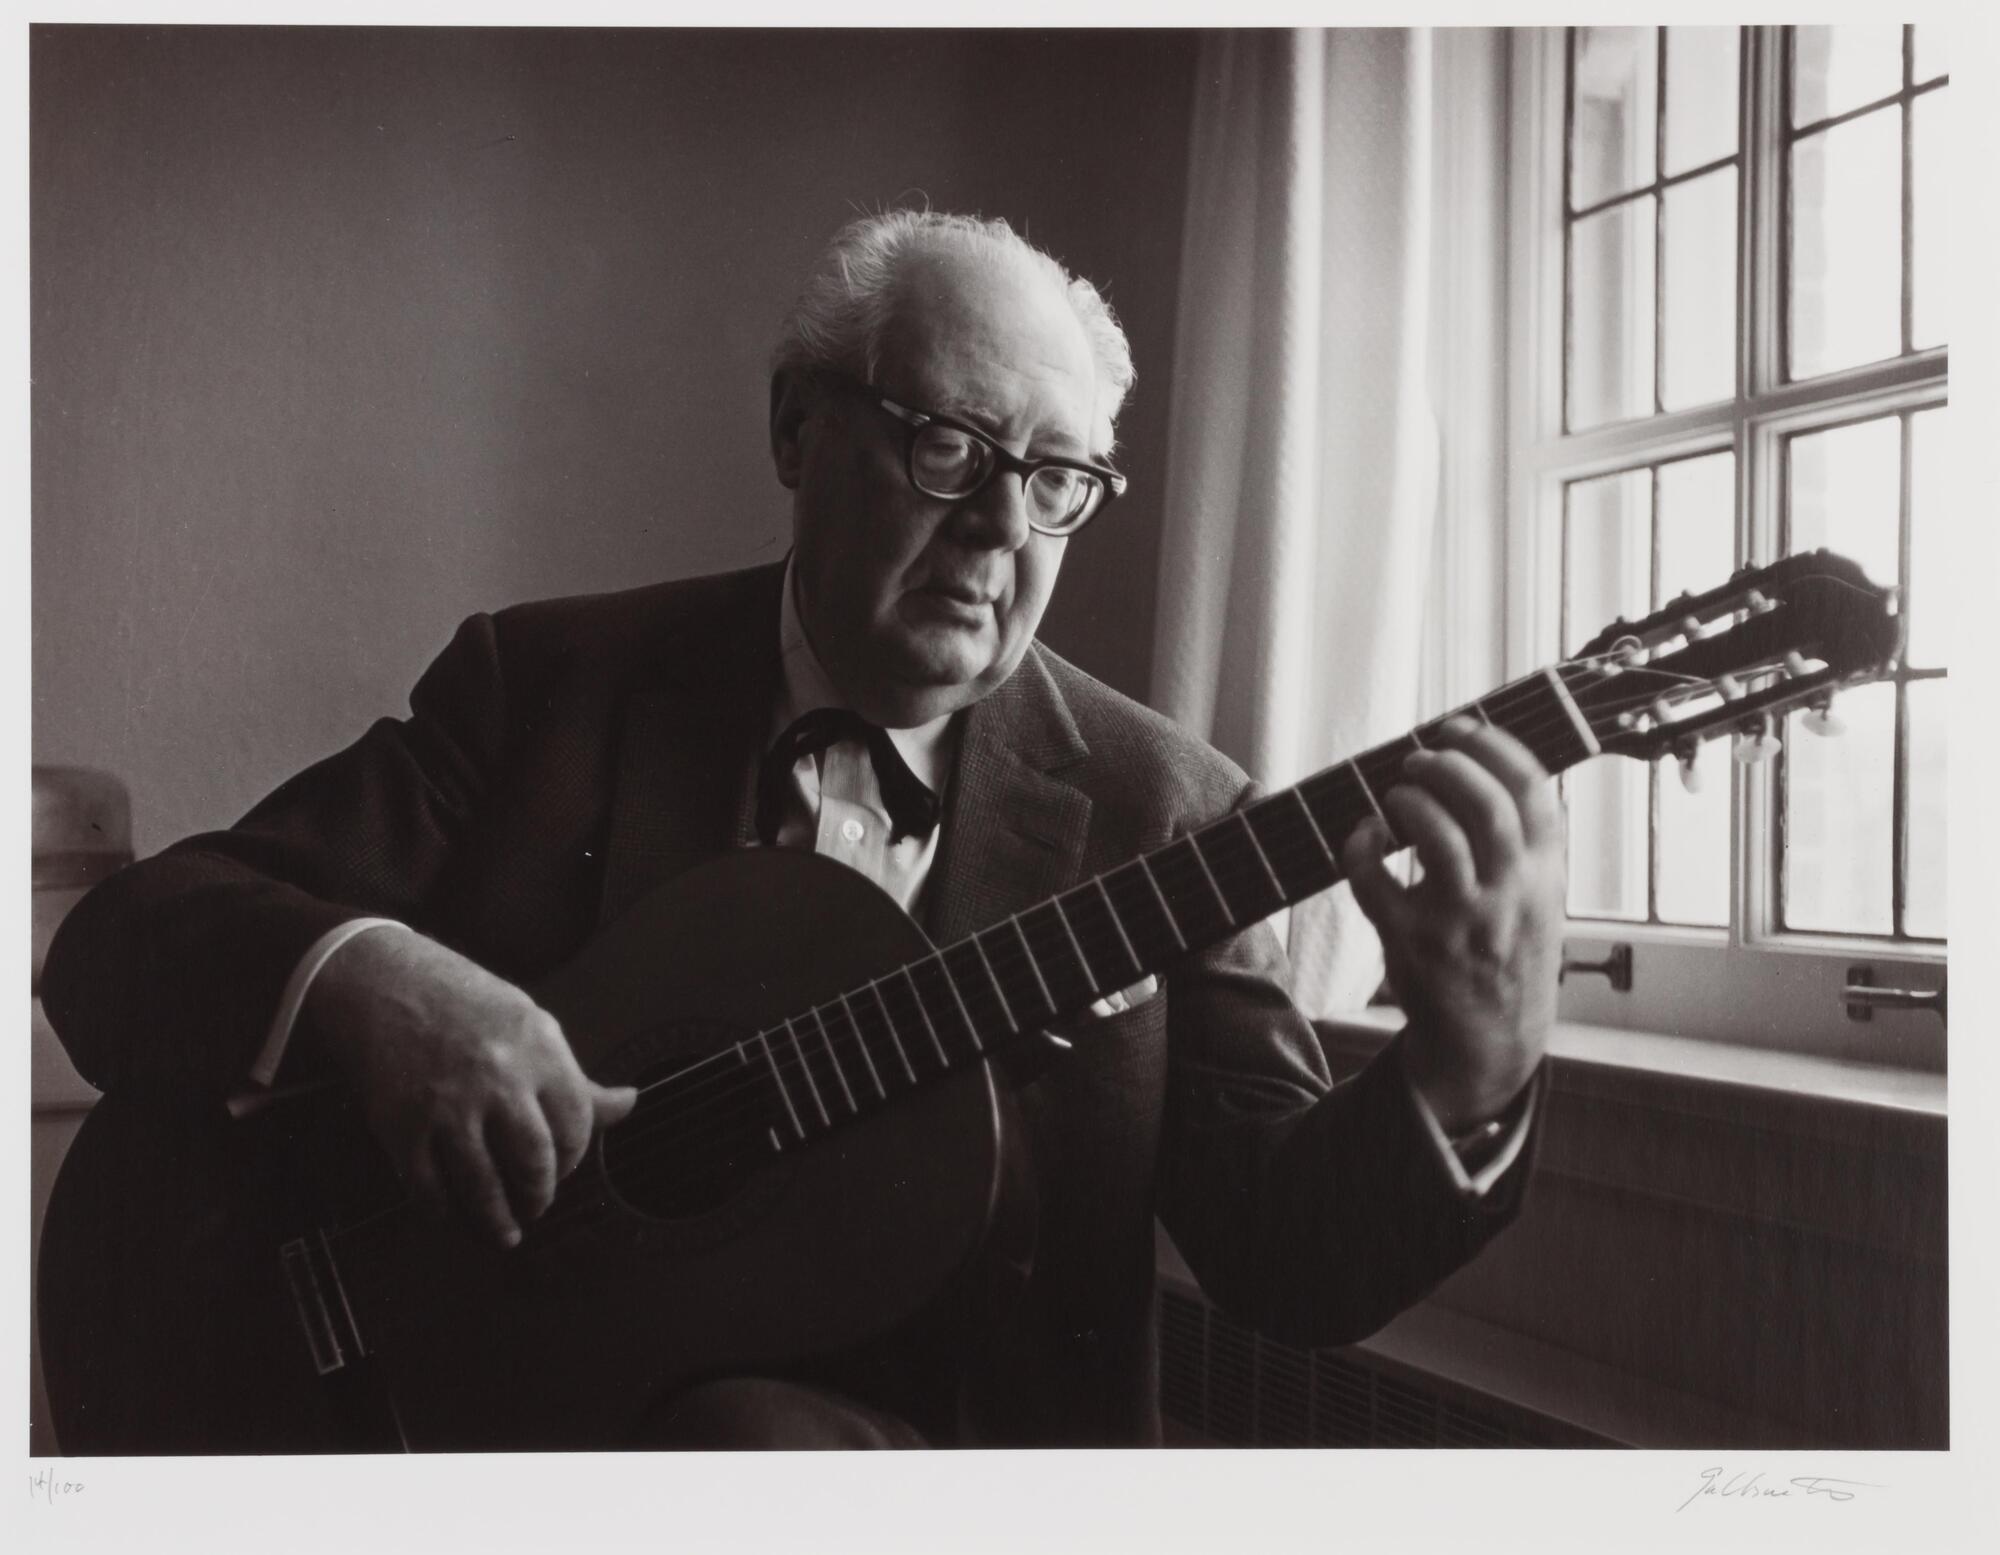 Older man playing guitar next to a window. He is wearing glasses, a button down shirt and a jacket.